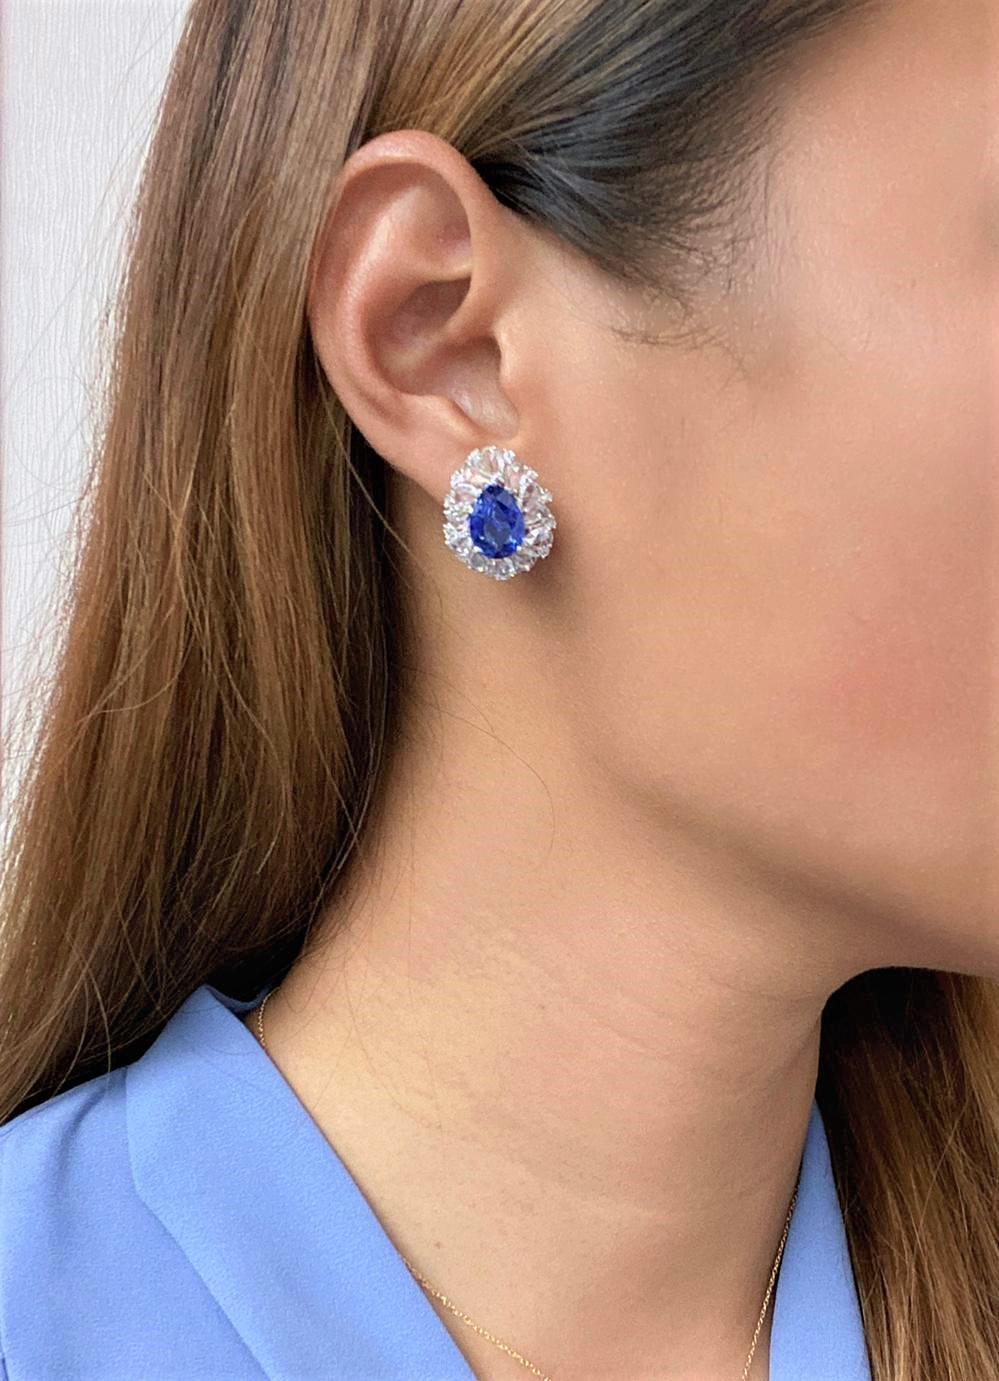 The Following Items we are offering is a Gorgeous Pair of Radiant 18KT White Gold Rare Ceylon Blue Sapphire and Brilliant Rare Rose Cut Diamond Earrings. Earrings are comprised of approx 12 Carats of Finely Set Magnificent Rare Large Ceylon Blue